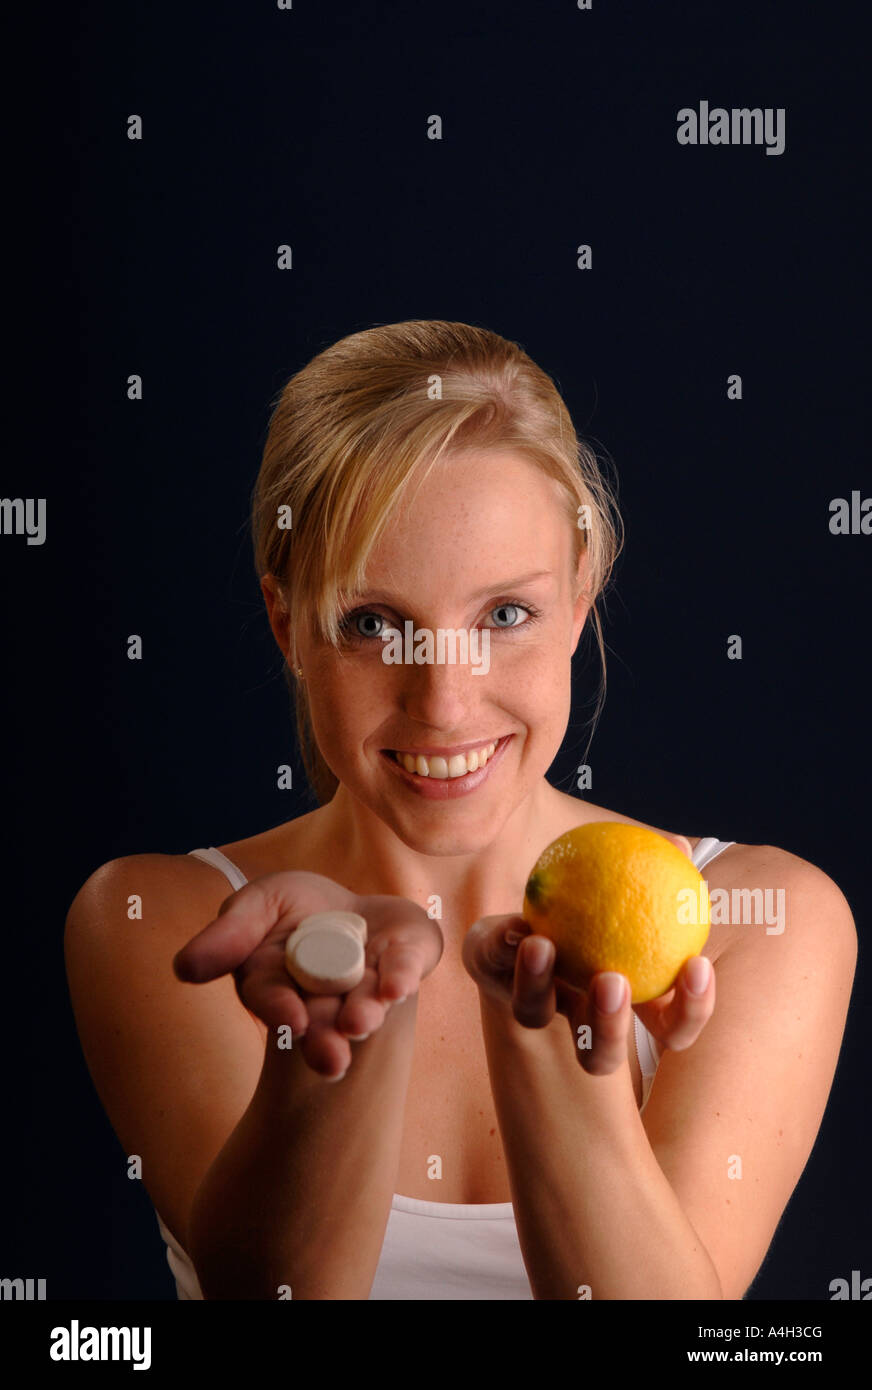 Vitamine or tablets? Stock Photo